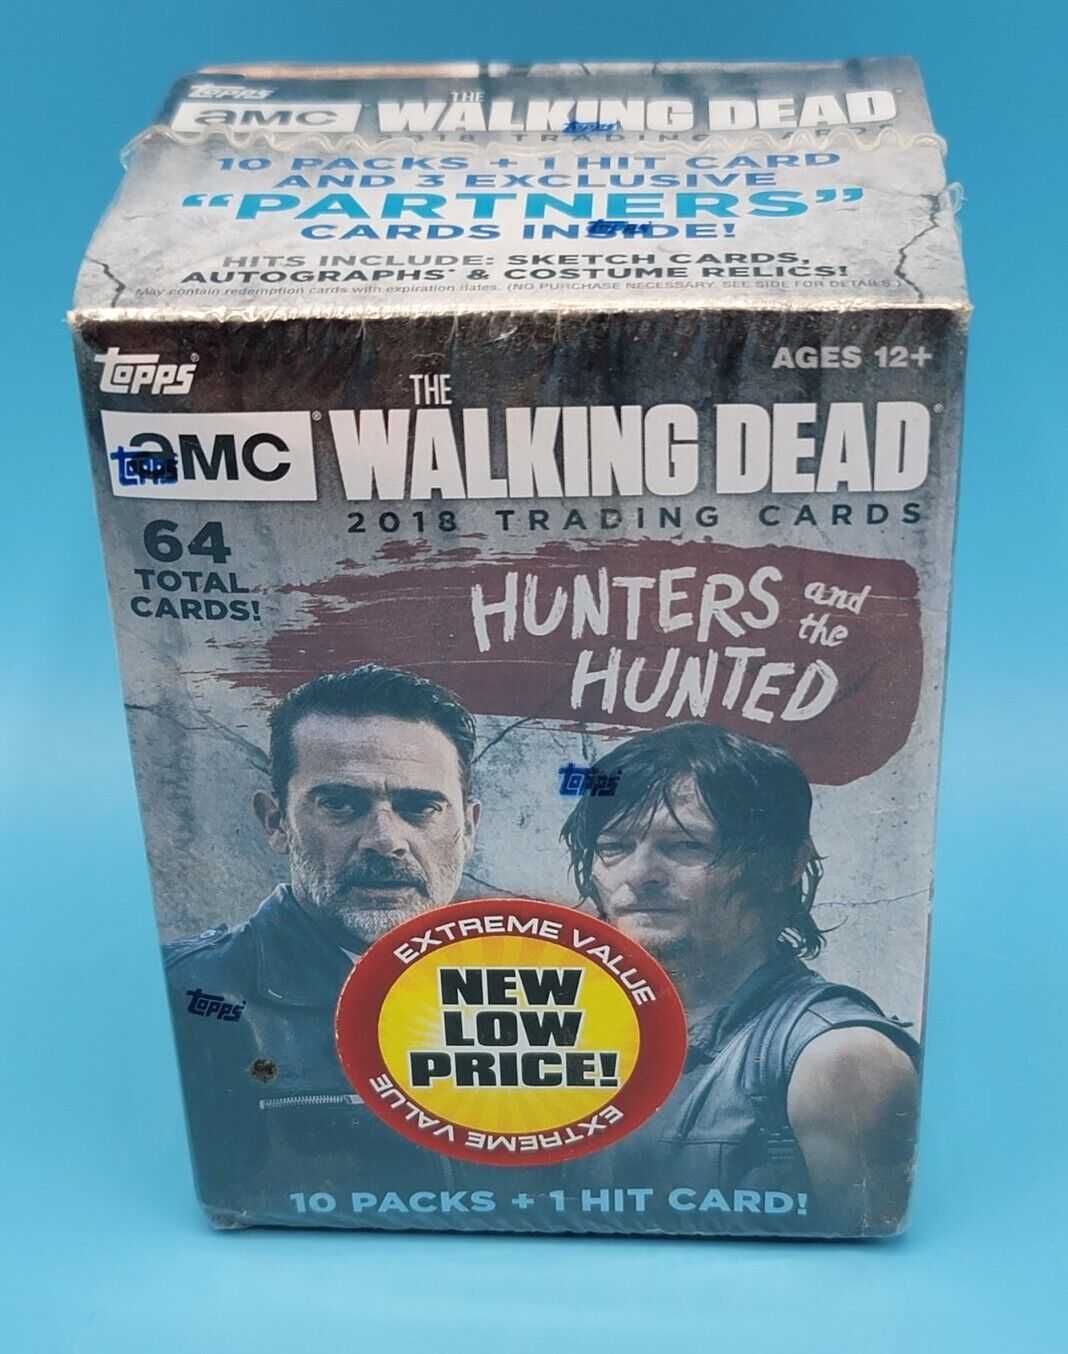 2018 Topps Walking Dead Trading Cards 1 Hit Per Box Hunters And The Hunted AMC